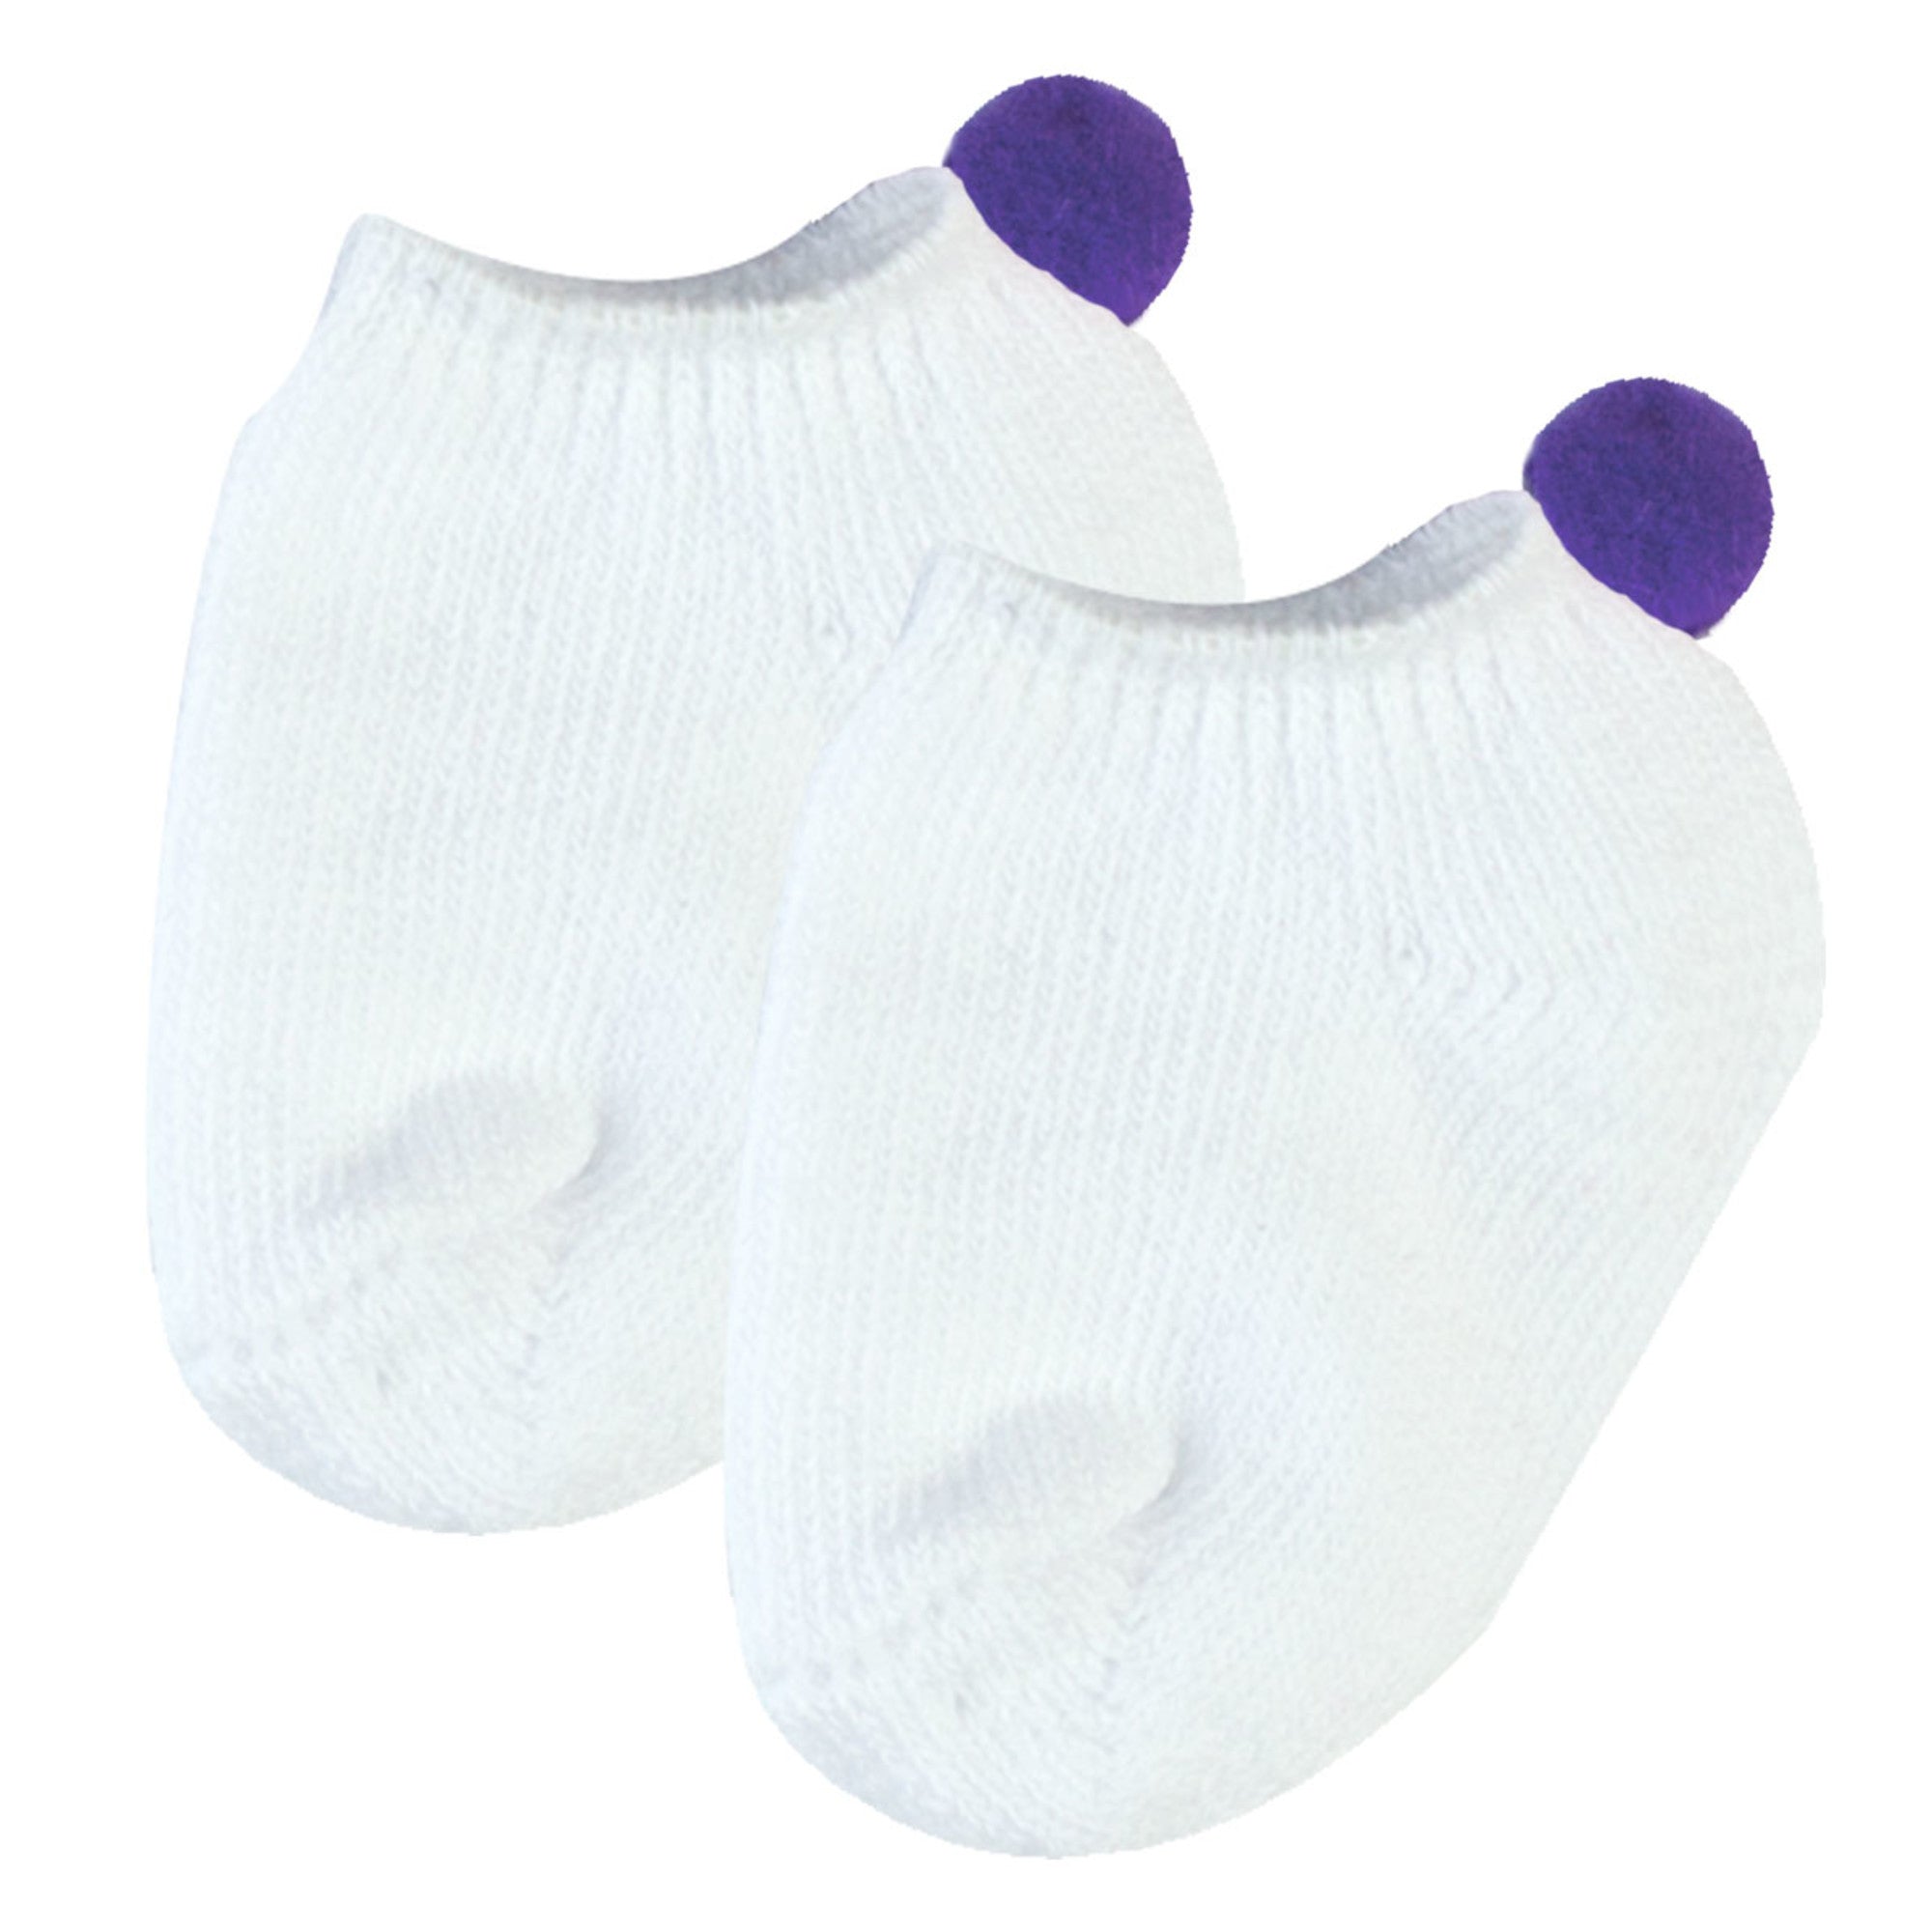 Sophia’s Mix & Match Wardrobe Essentials Basic Solid-Colored Ankle Socks with Pom-Poms for 18” Dolls, White/Purple